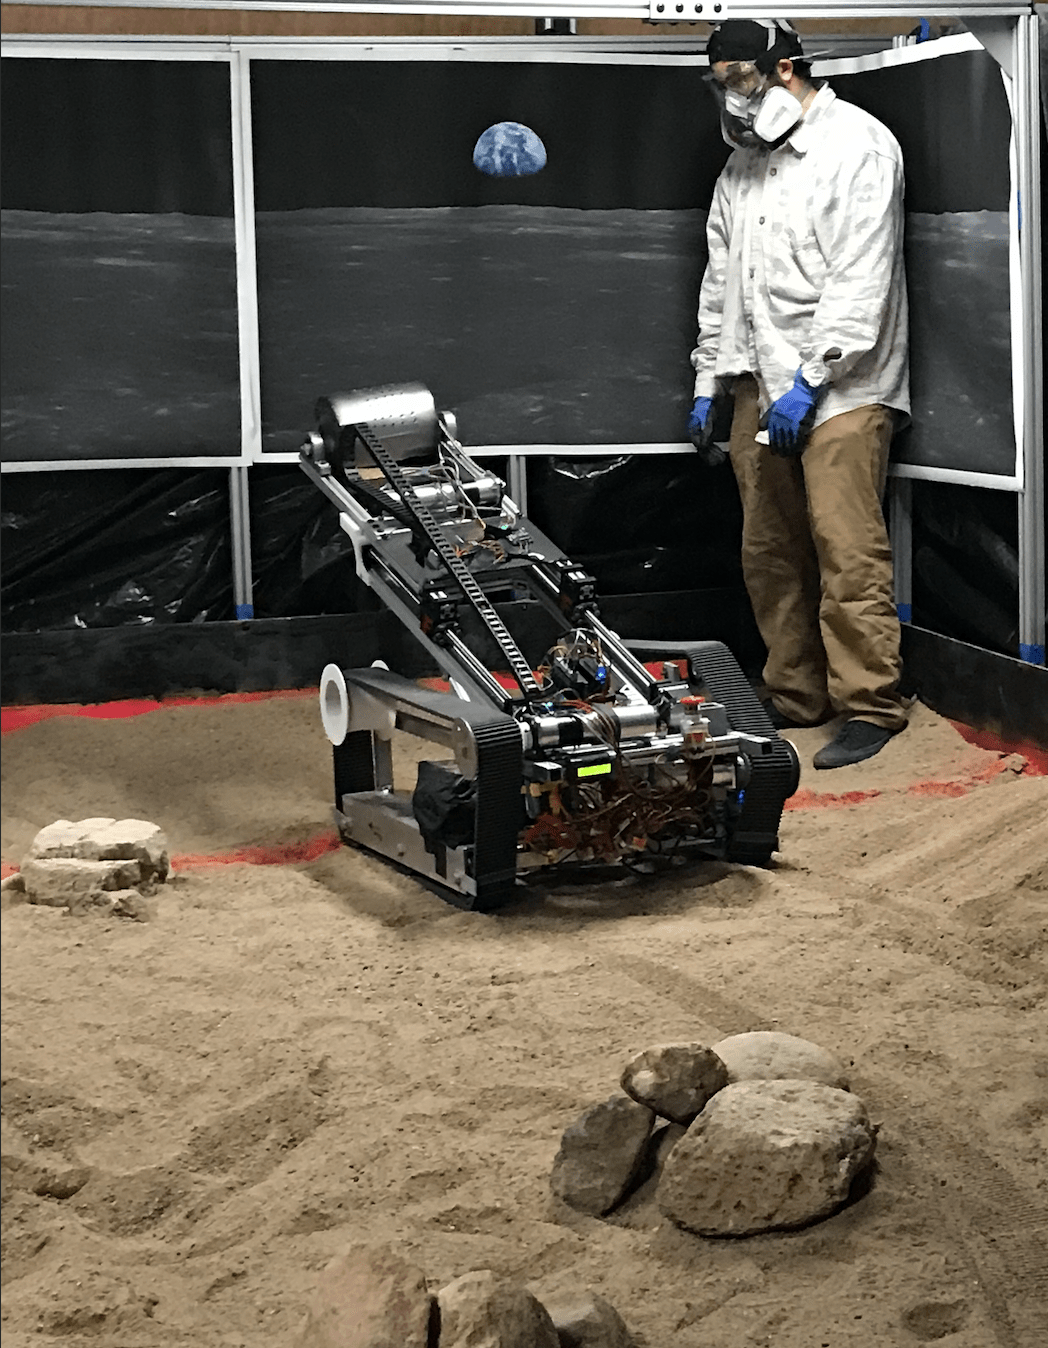 The New Mexico College of Mining and Technology robotic miner takes its first dig in the school’s mining arena.